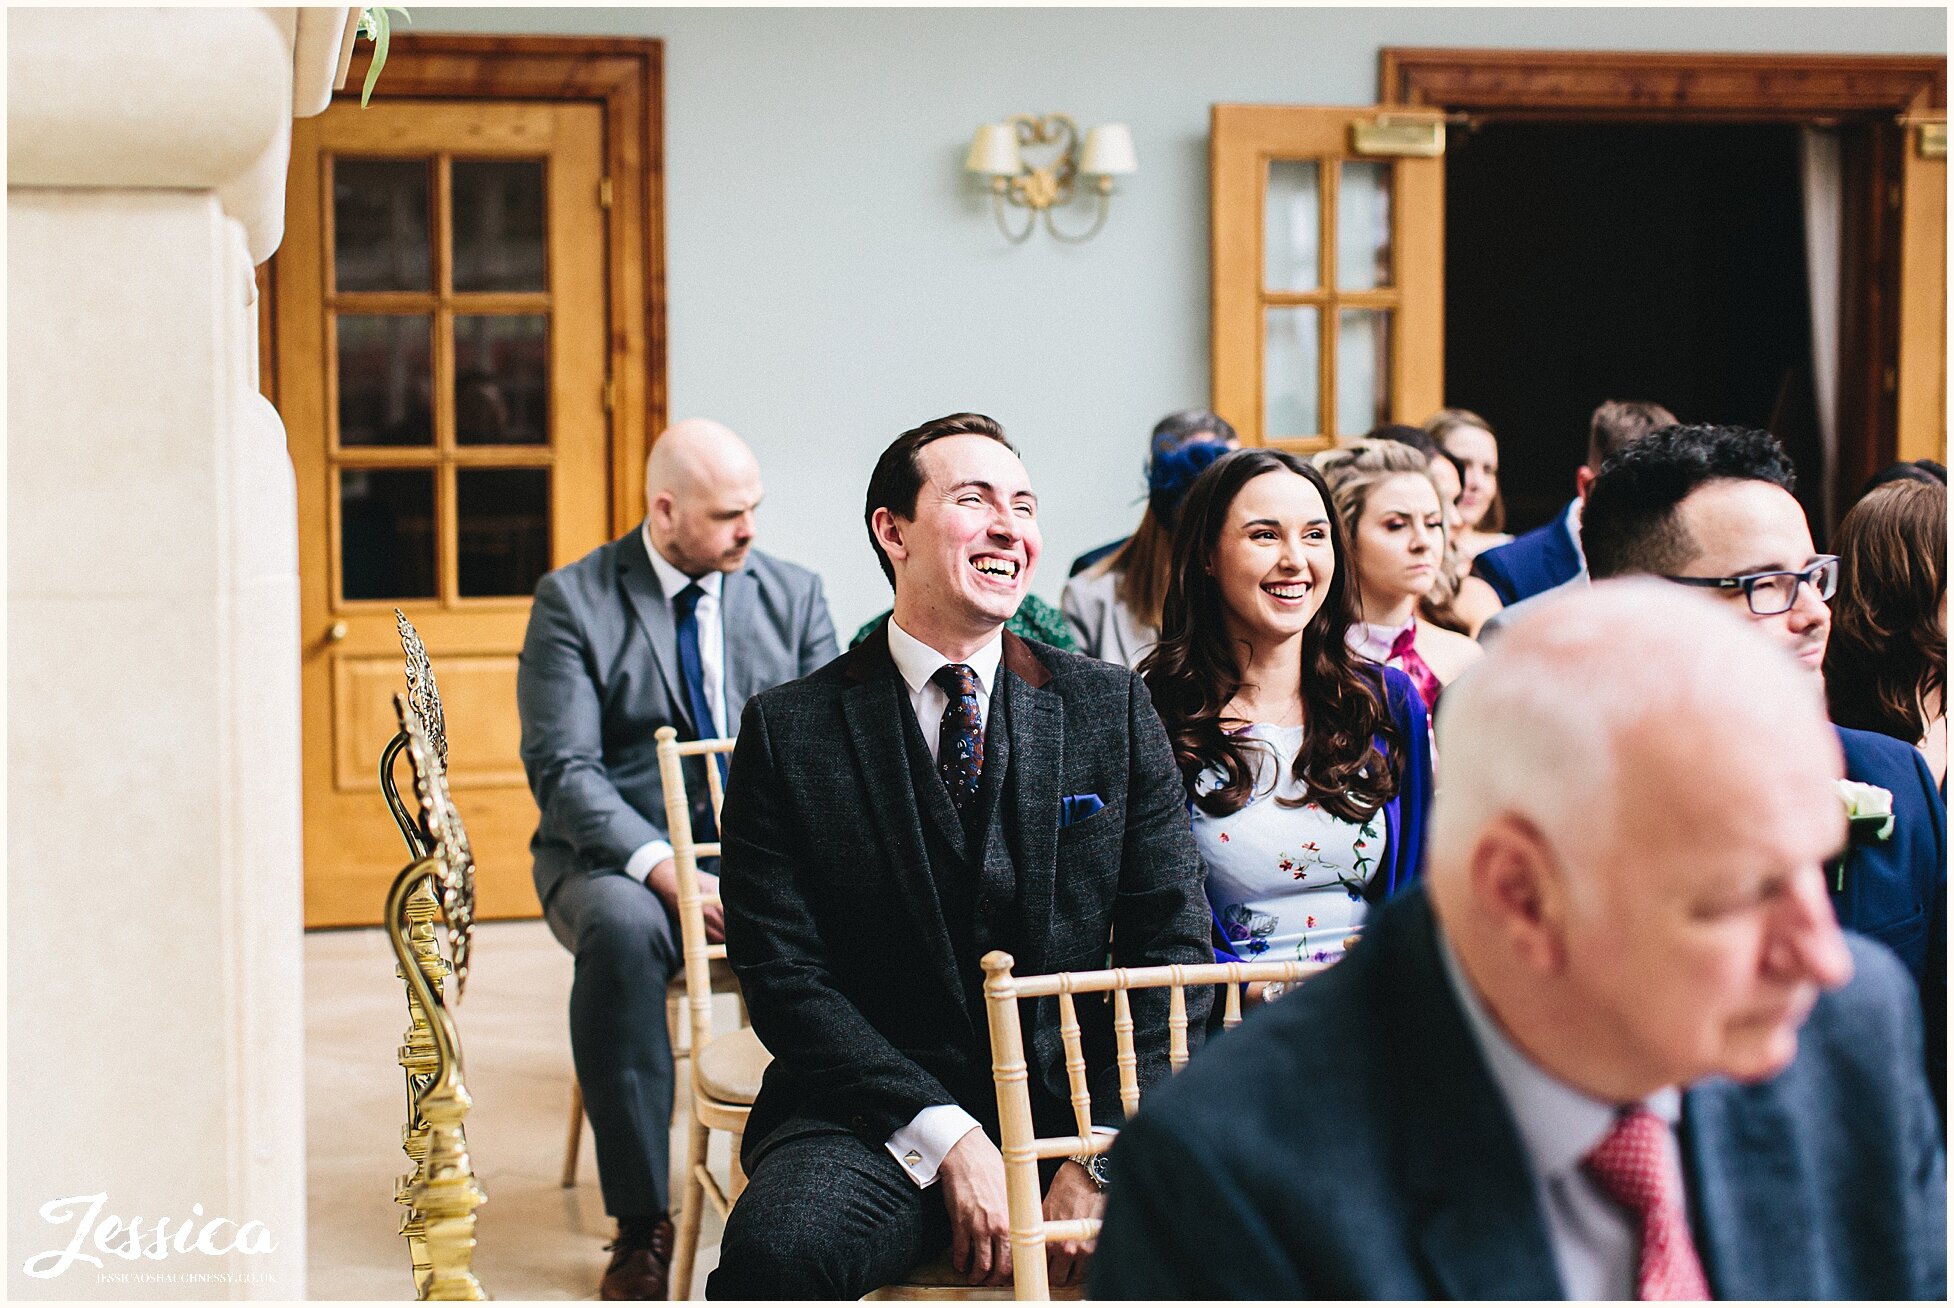 guests laugh as they are seated for the Willington Hall wedding ceremony